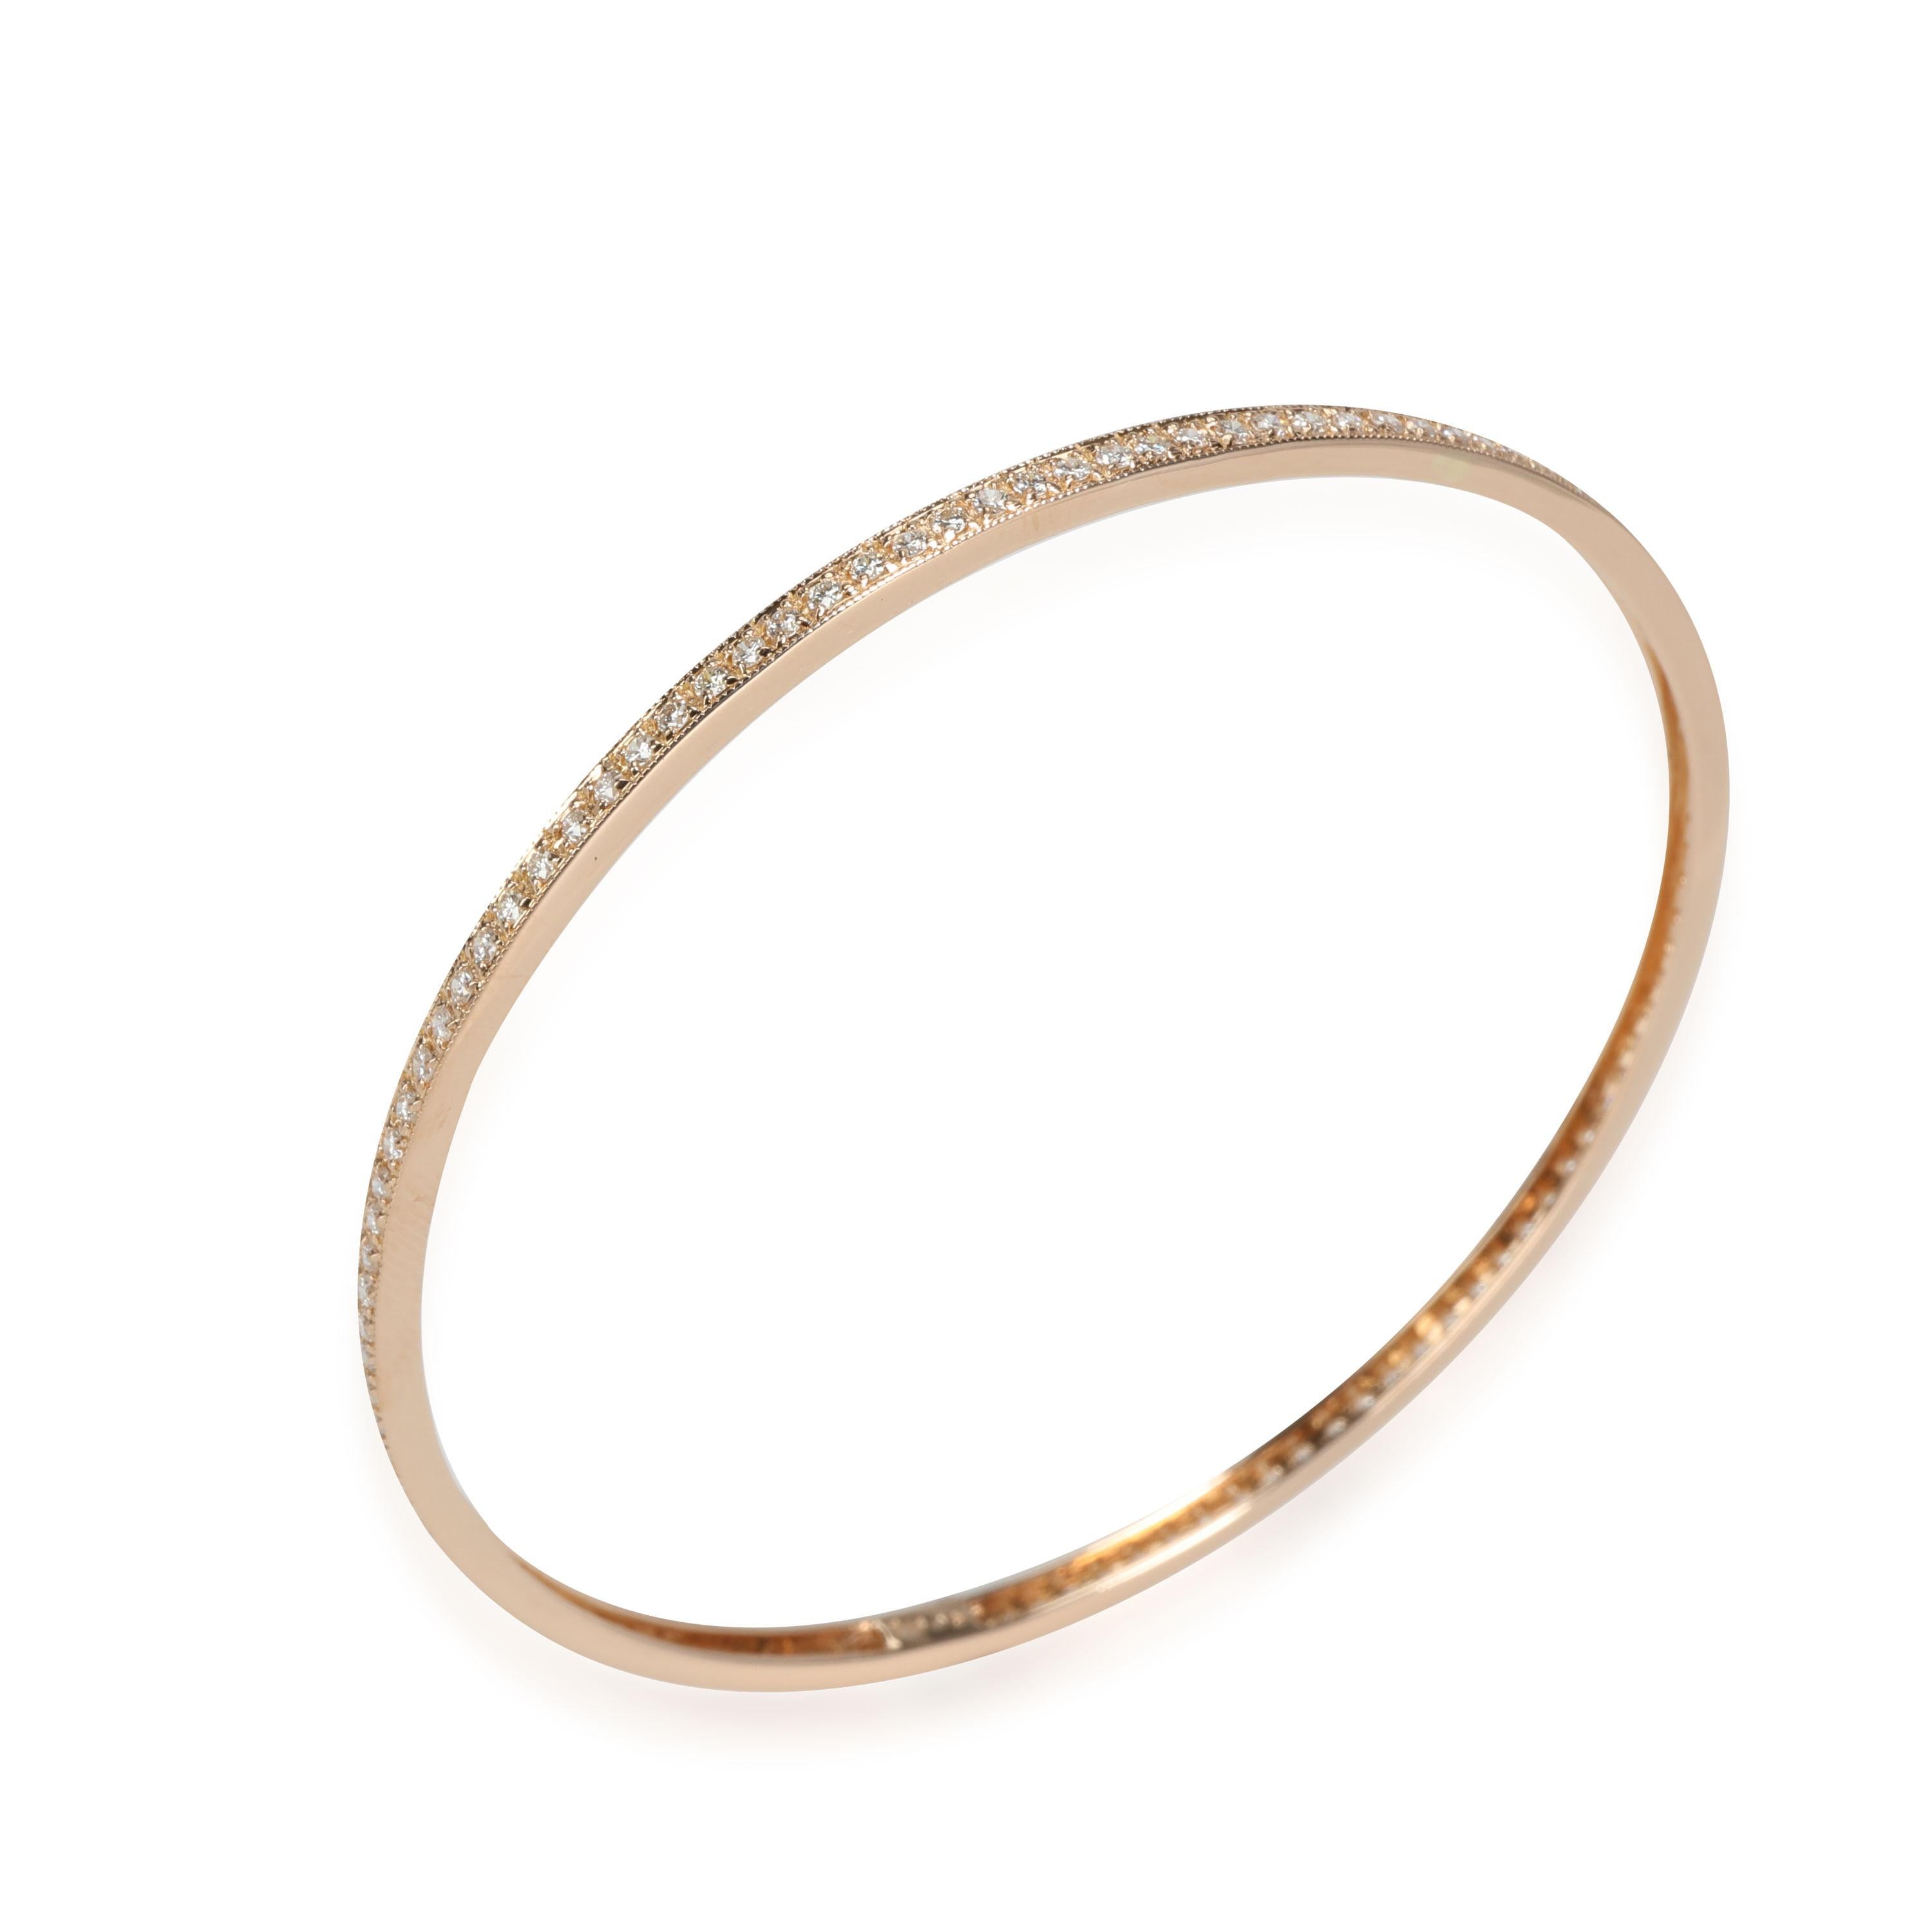 Diamond Bangle in 18k Rose Gold 1.75 CTW

PRIMARY DETAILS
SKU: 117284
Listing Title: Diamond Bangle in 18k Rose Gold 1.75 CTW
Condition Description: Retails for 2995 USD. In excellent condition and recently polished. Chain is 8 inches in